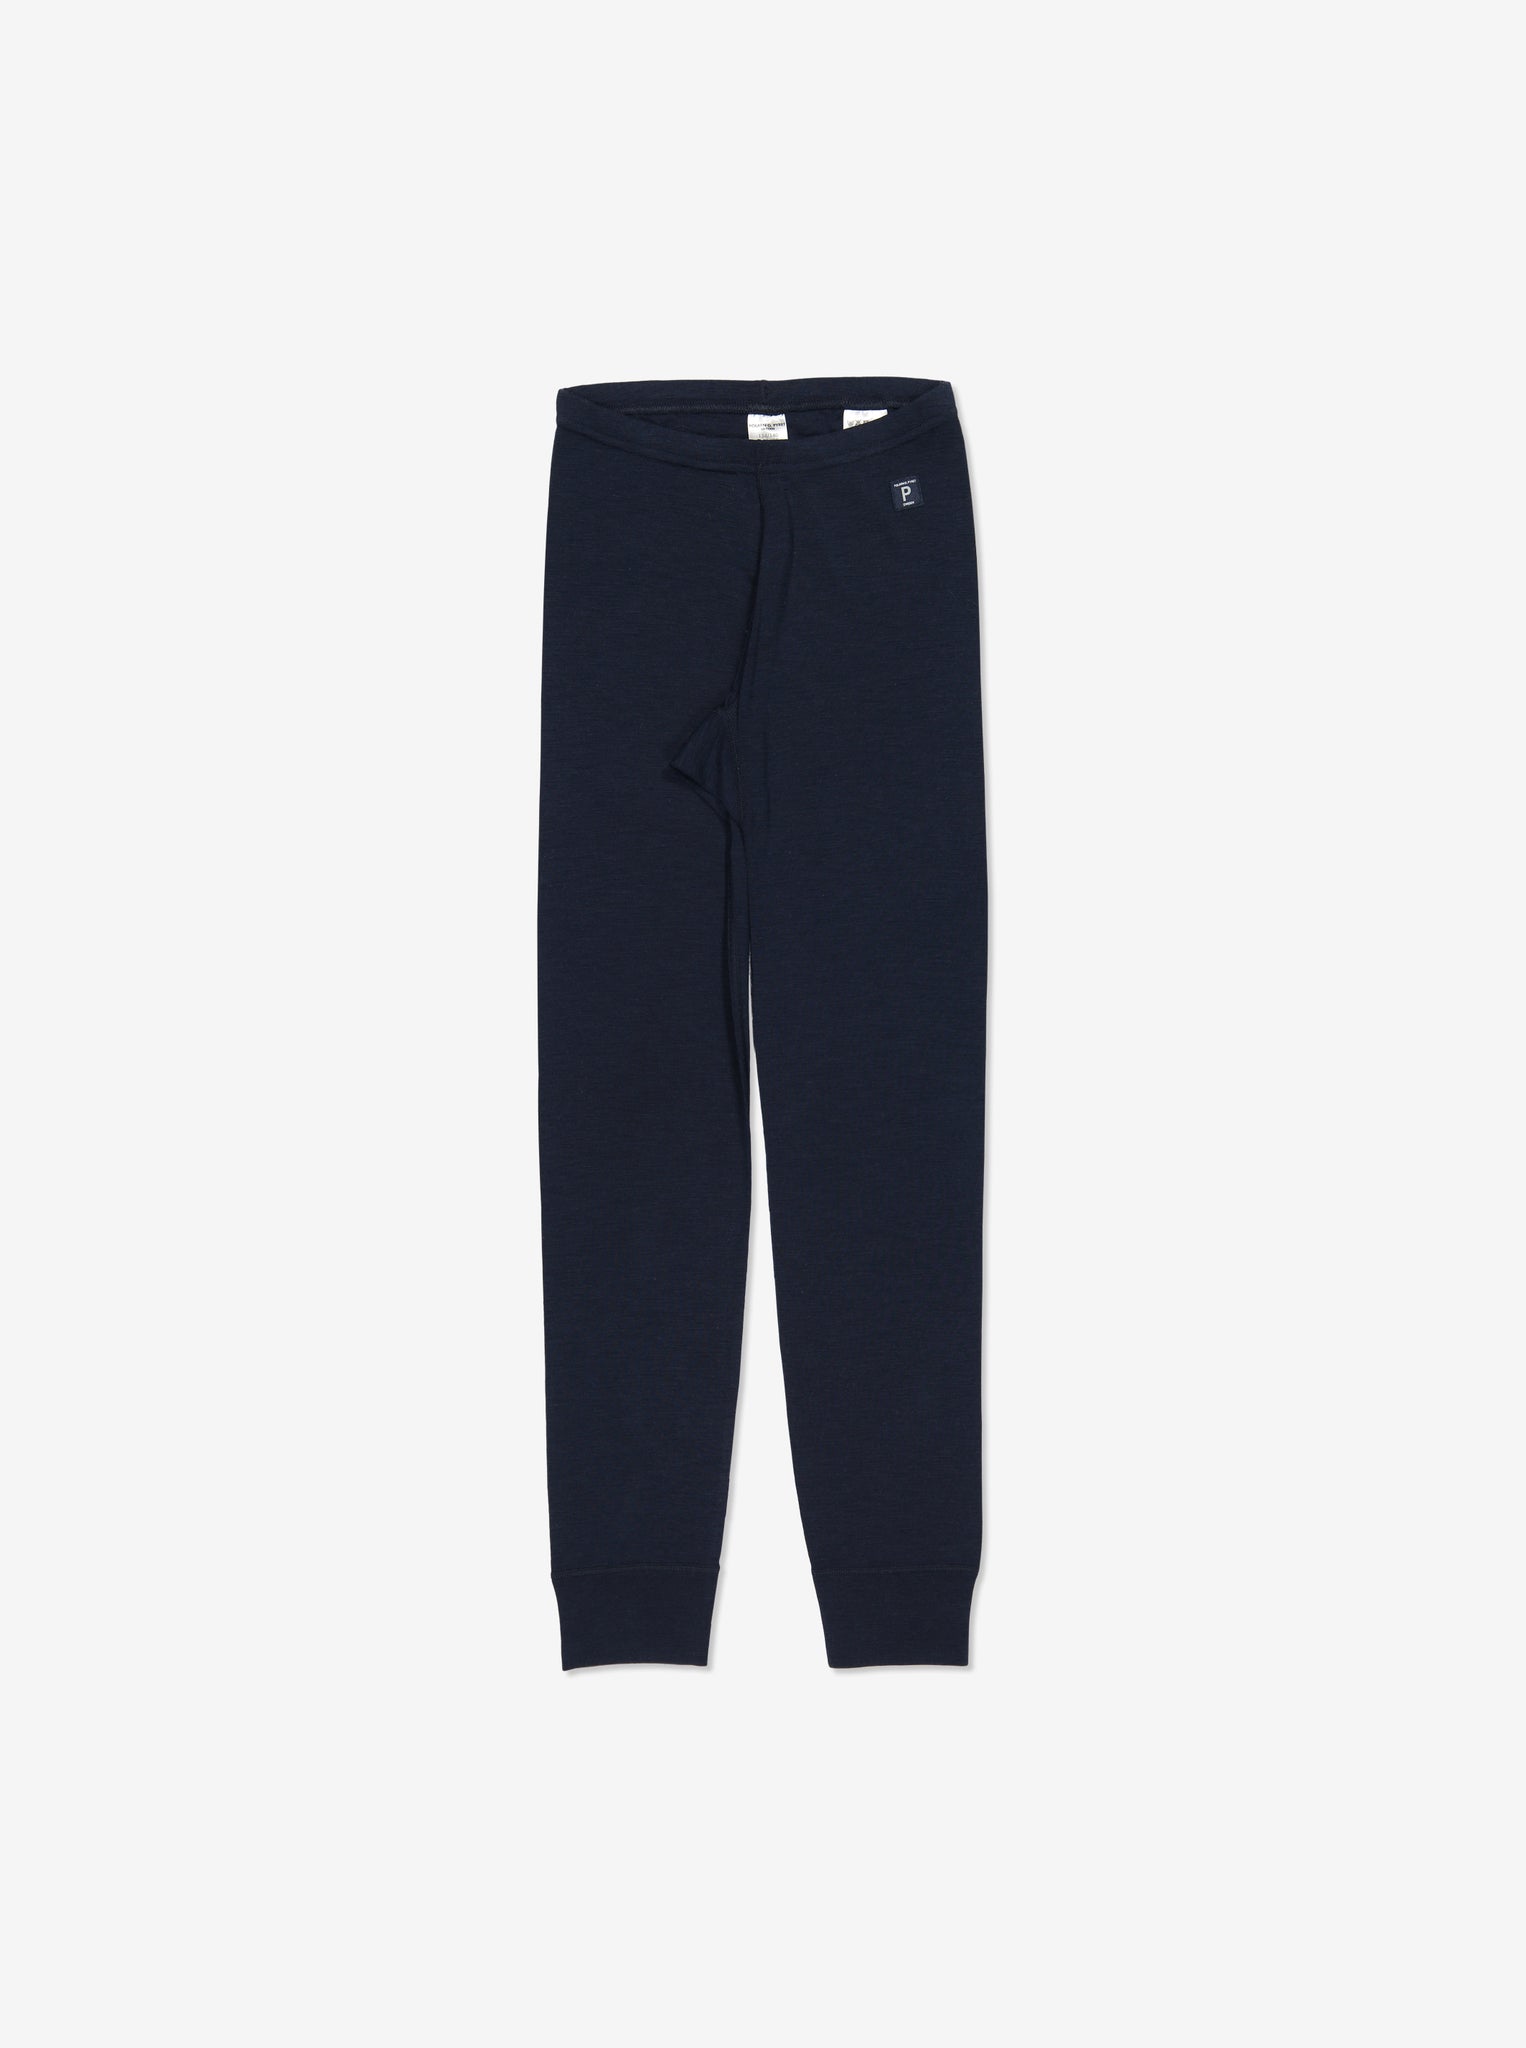 kids merino long johns navy, warm and comfortable, ethical and long lasting polarn o. pyret